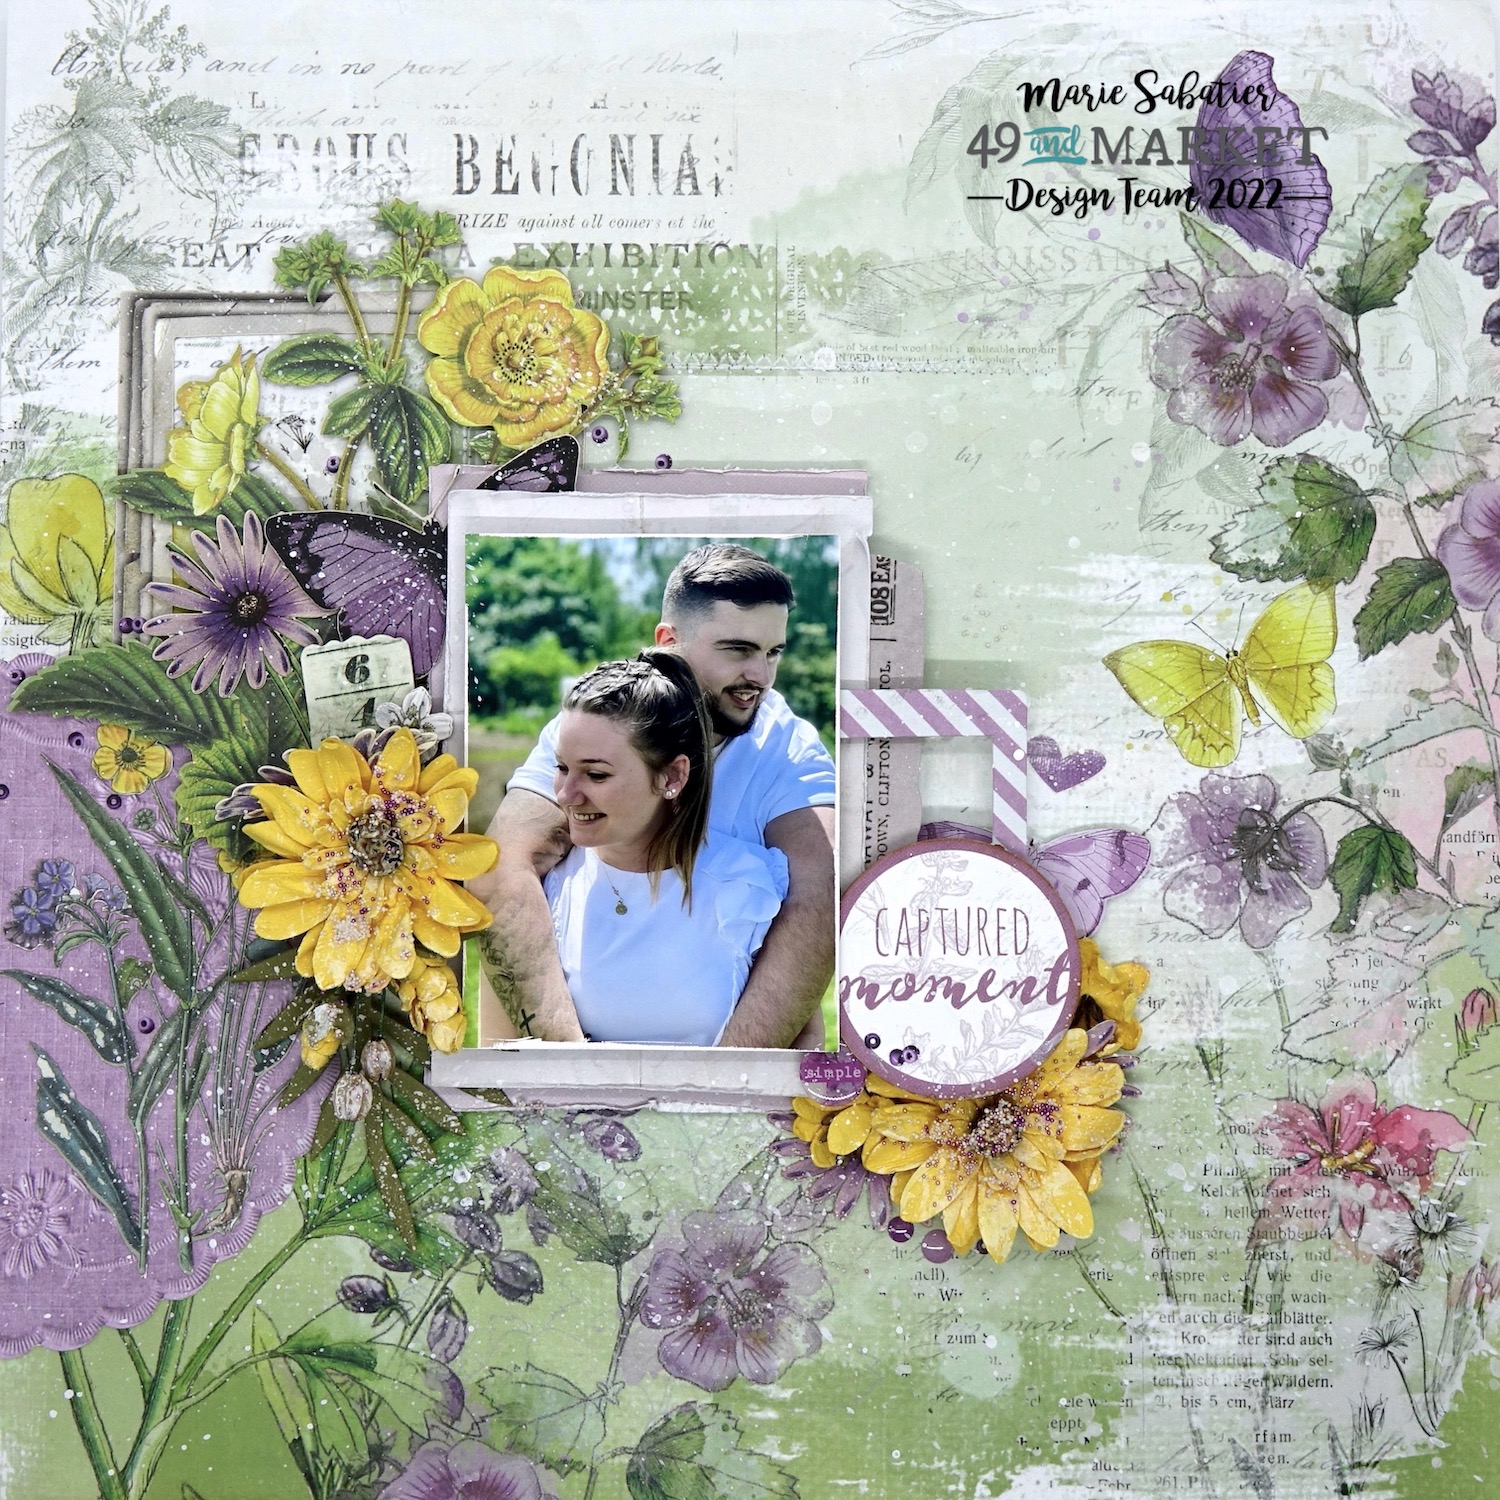 CAPTURED moment - Layout by Marie Sabatier